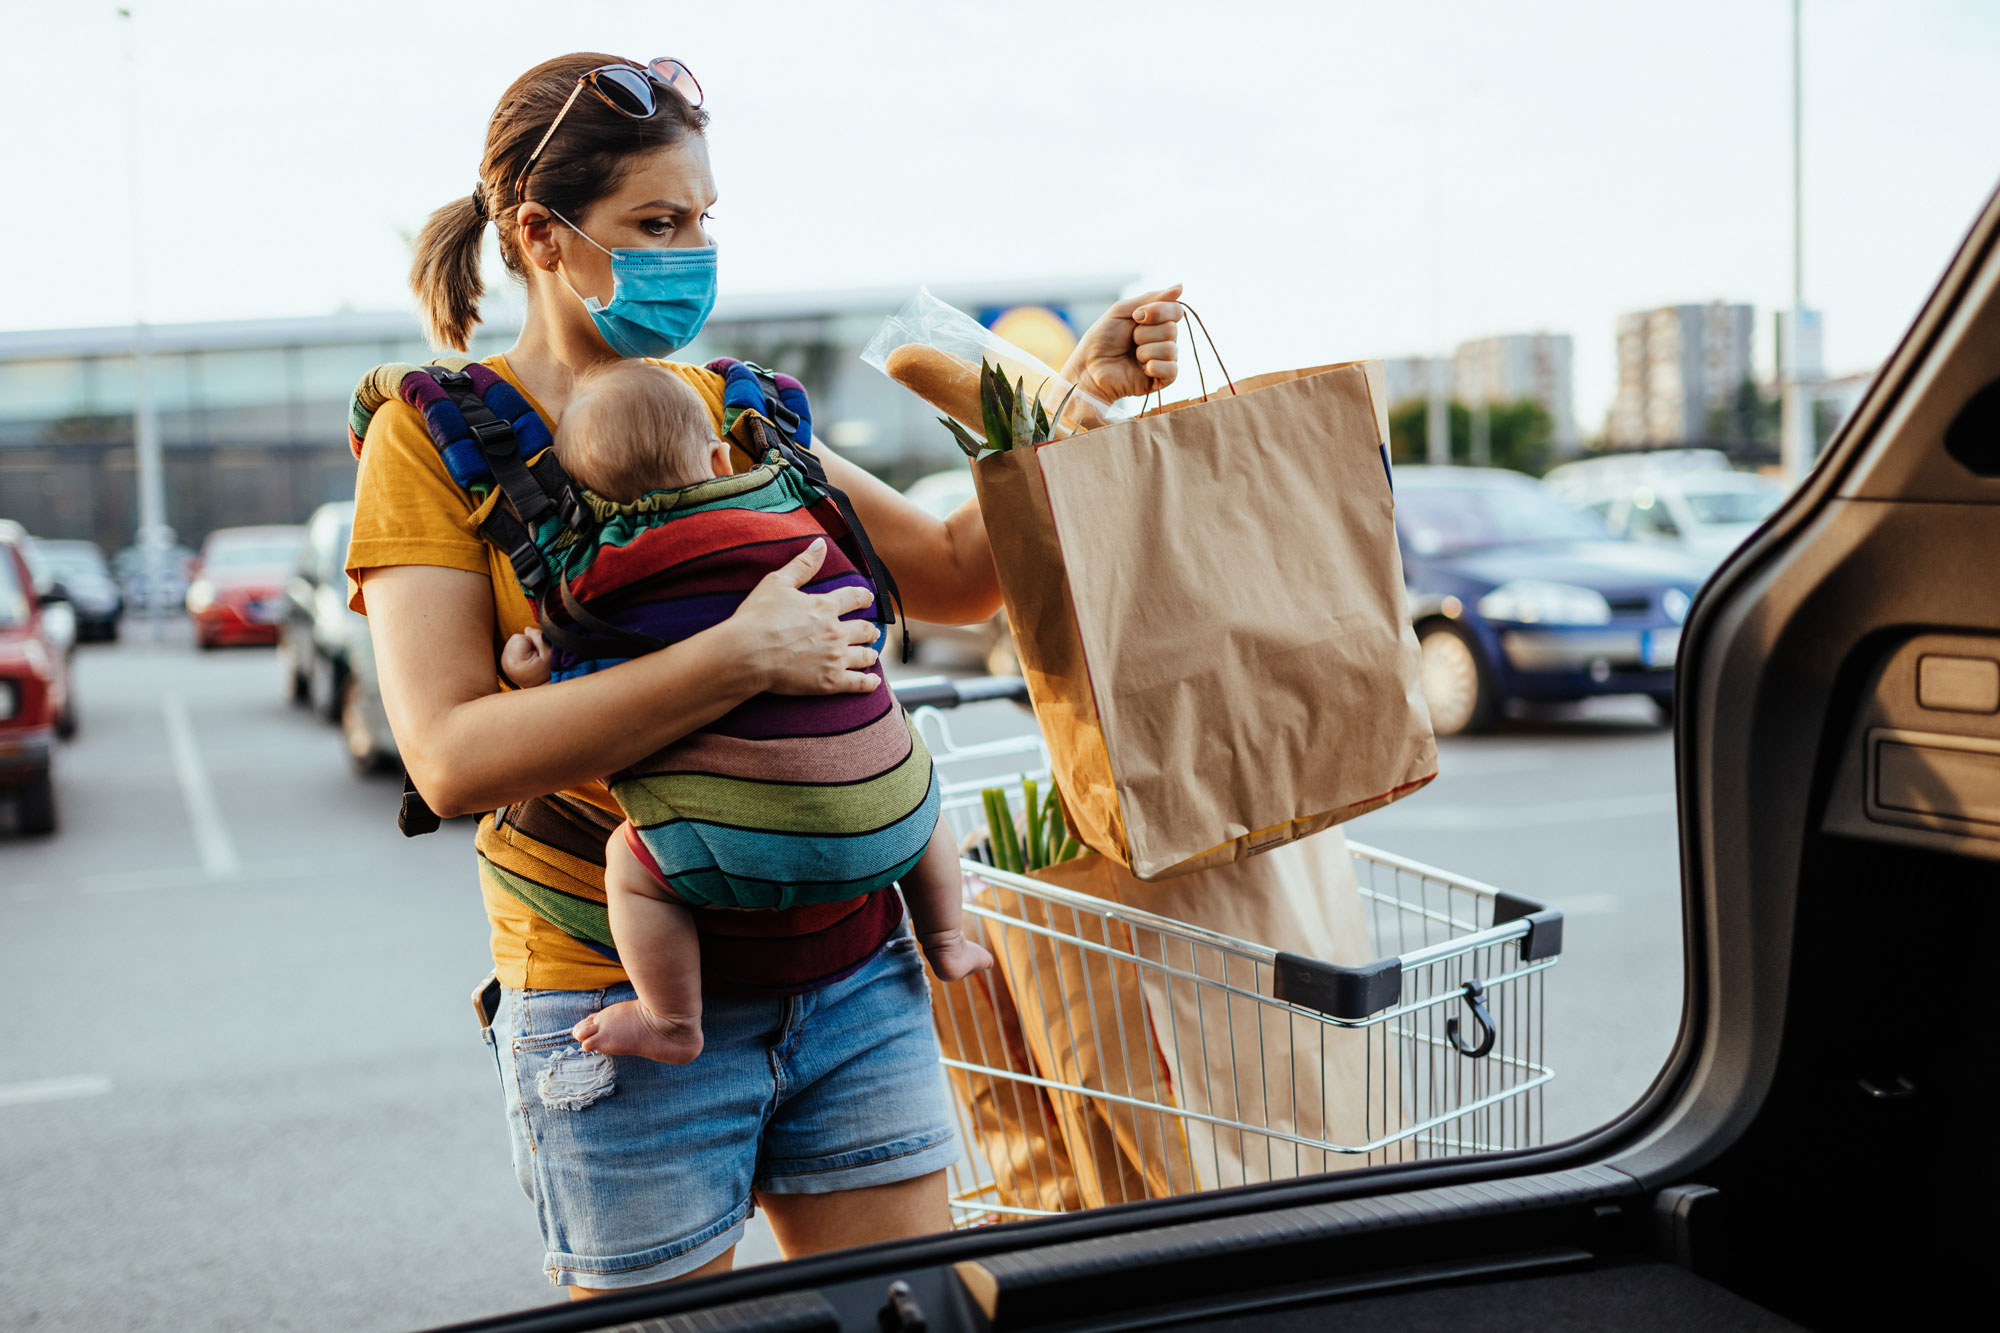 photo - Mother with Baby Putting Groceries in Car